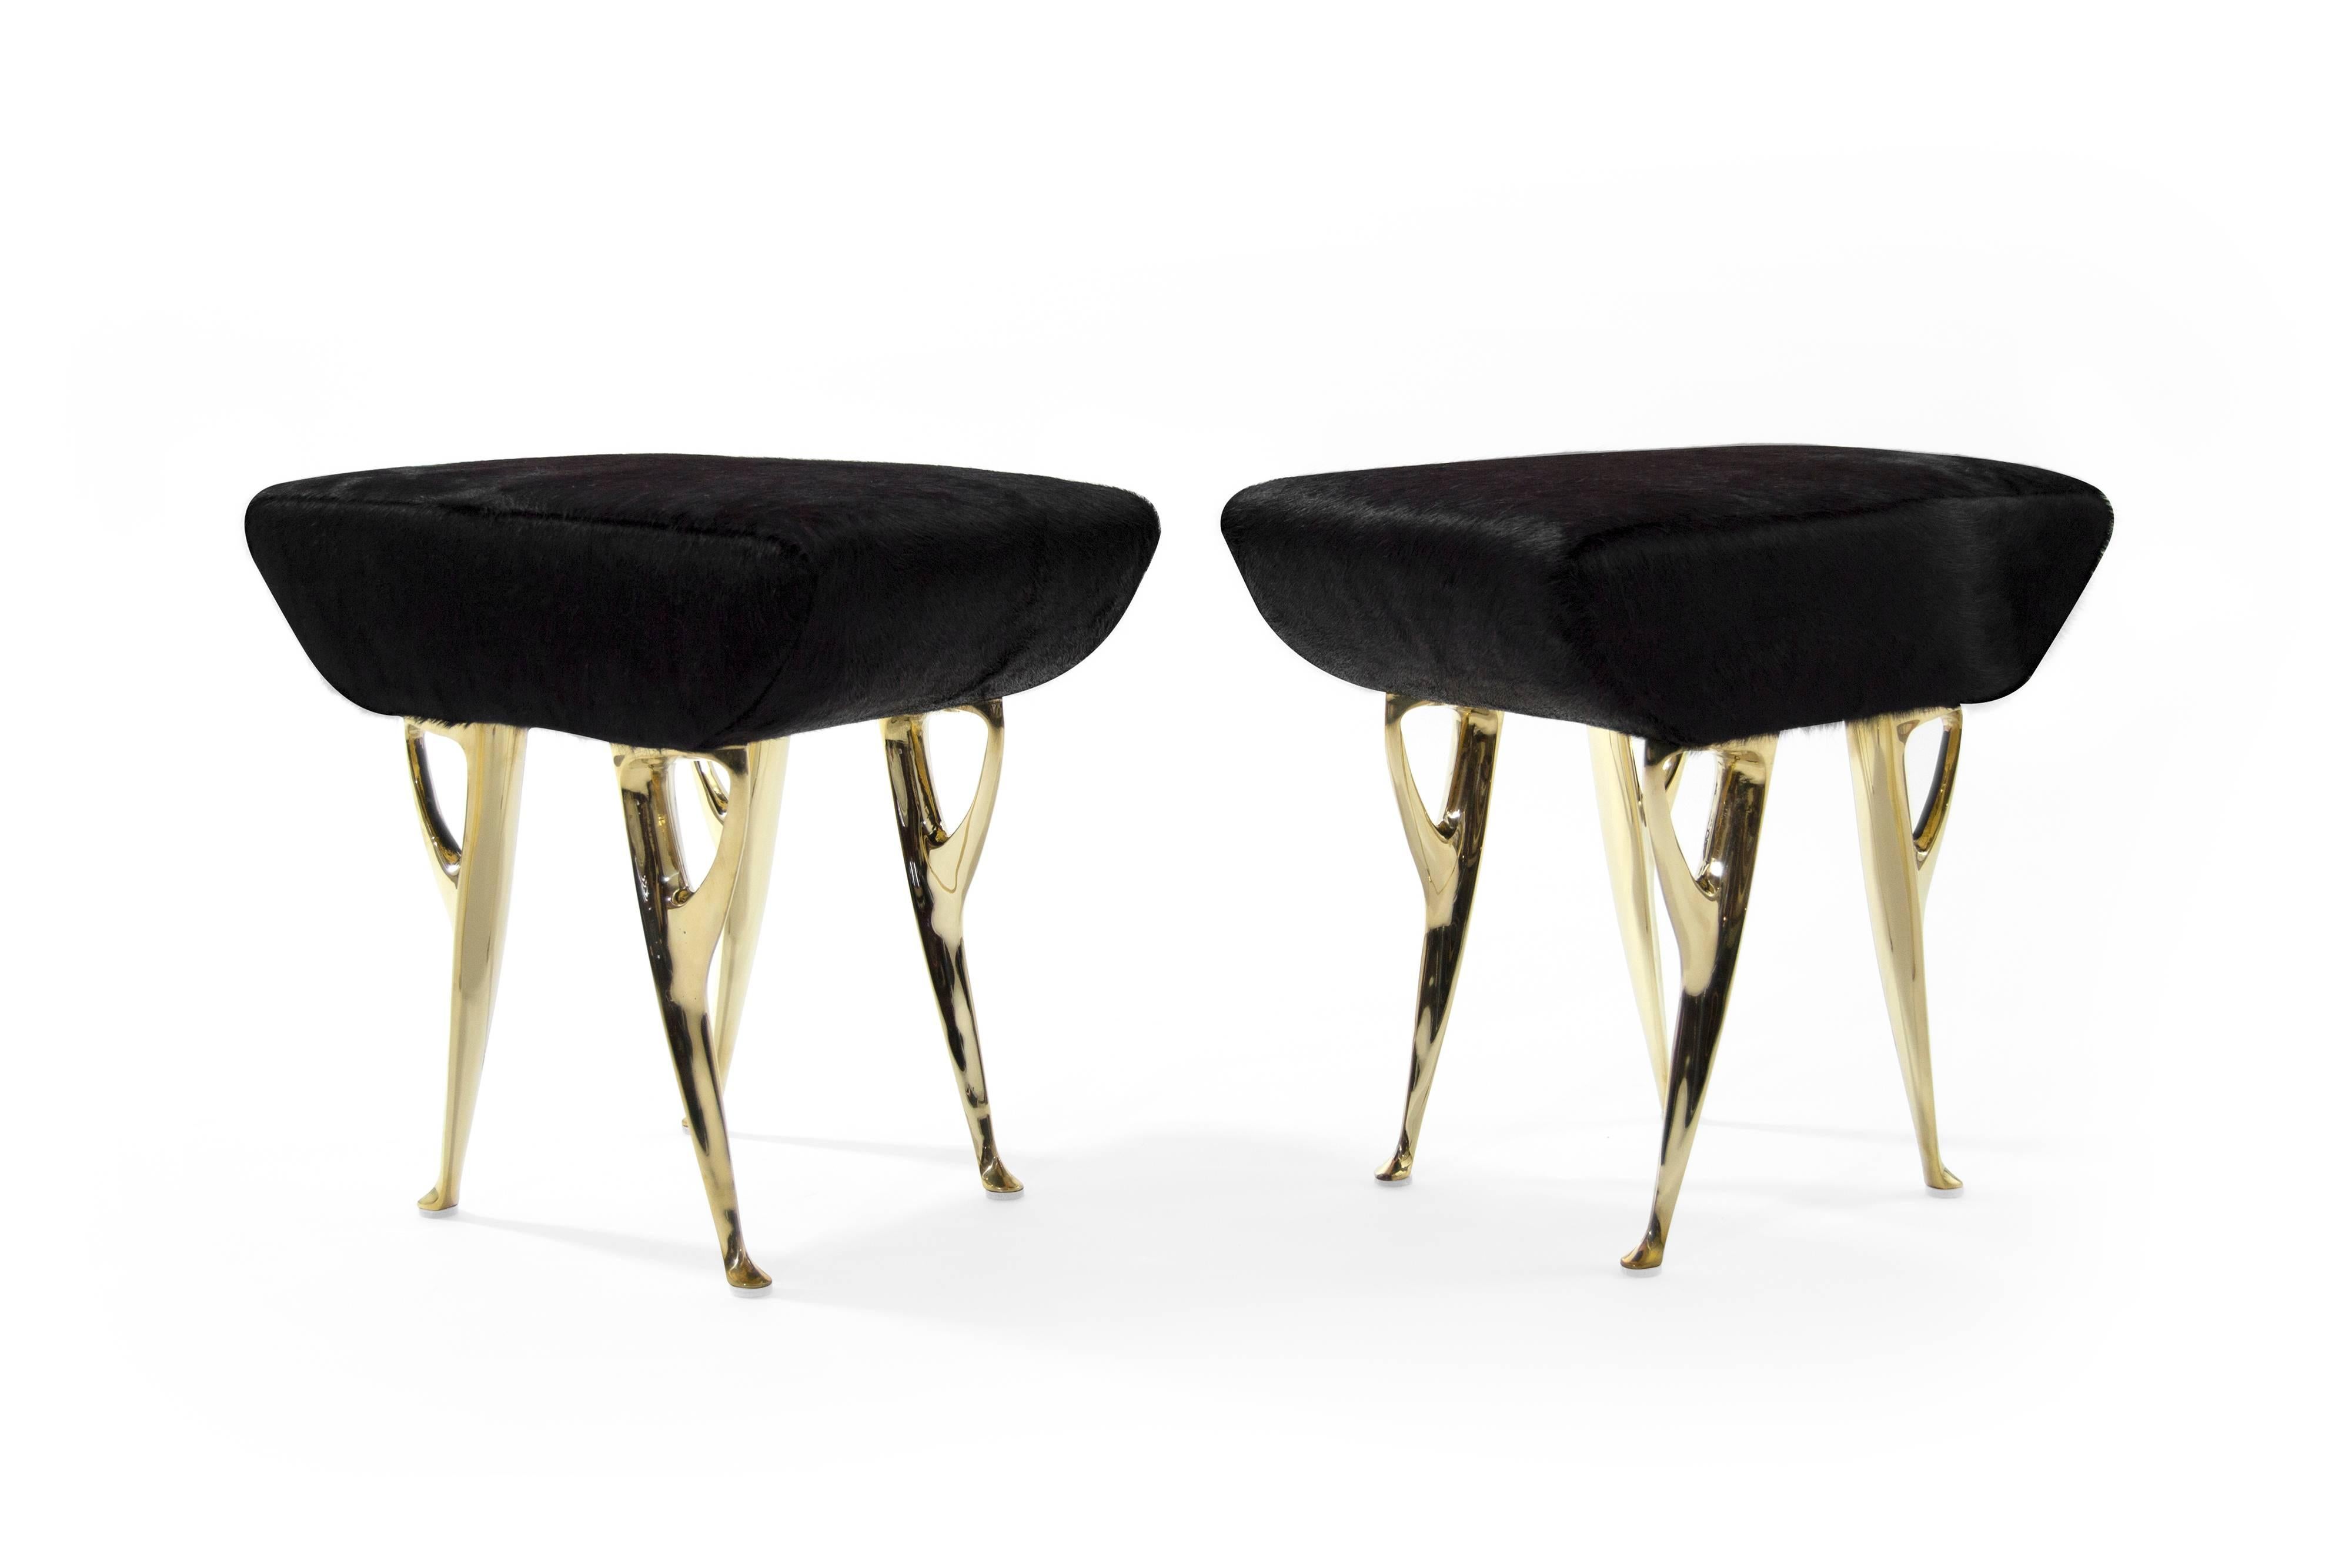 A pair of lovely modern stools, originally manufactured in Italy, circa 1950s. 

Solid brass legs newly polished, upholstered in black hair on hide.